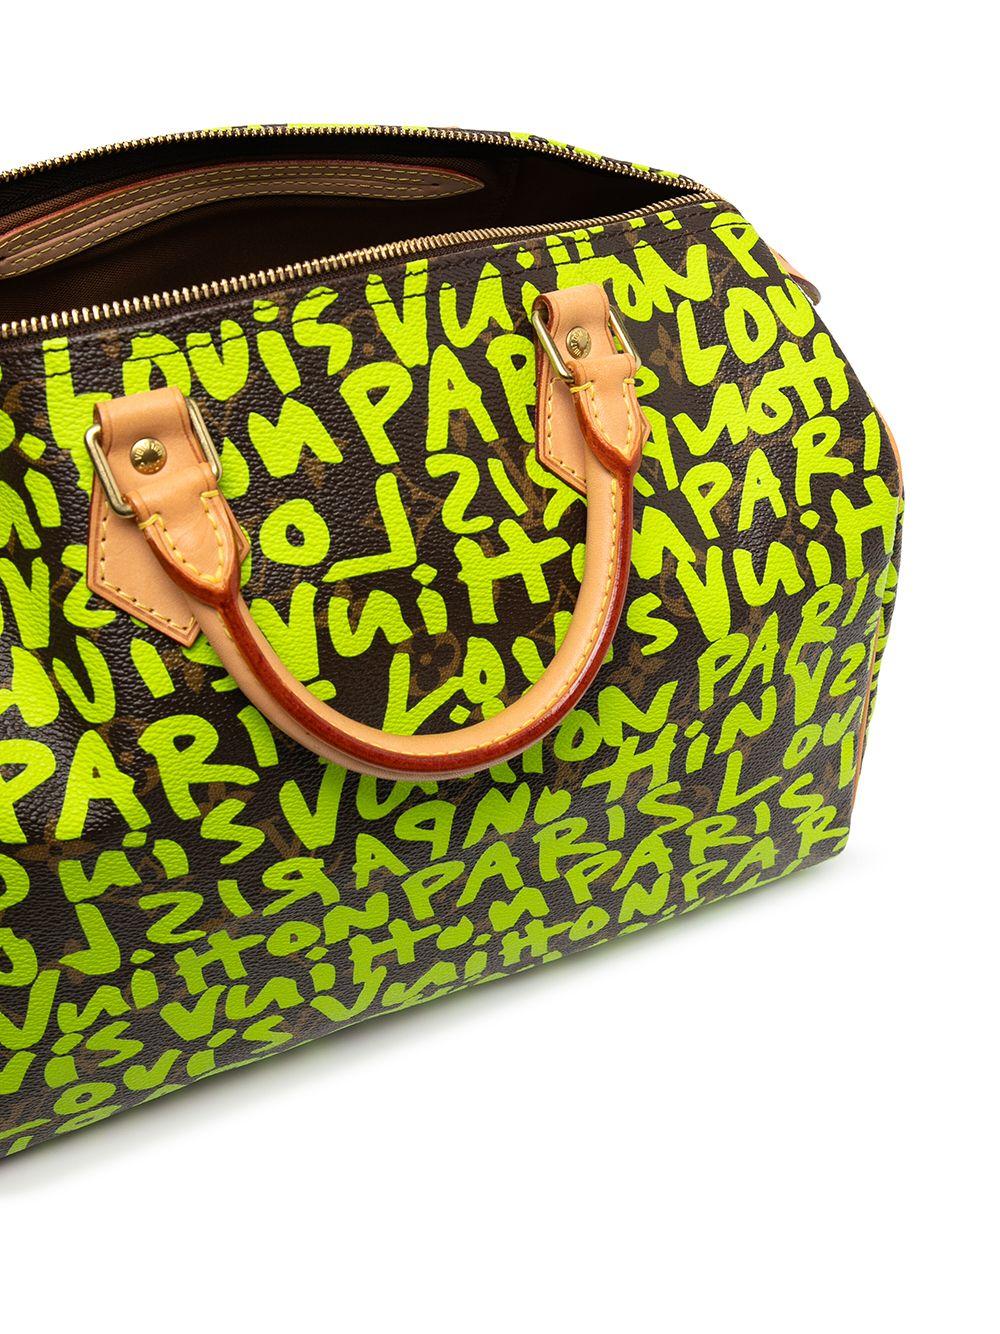 Add some excitement to your outfit with this pre-owned Louis Vuitton Speedy 30. Designed in 2001 by Marc Jacobs in collaboration with Stephen Sprouse this iconic speedy bag features a lime green graffiti design, shiny gold-tone hardware, top zip